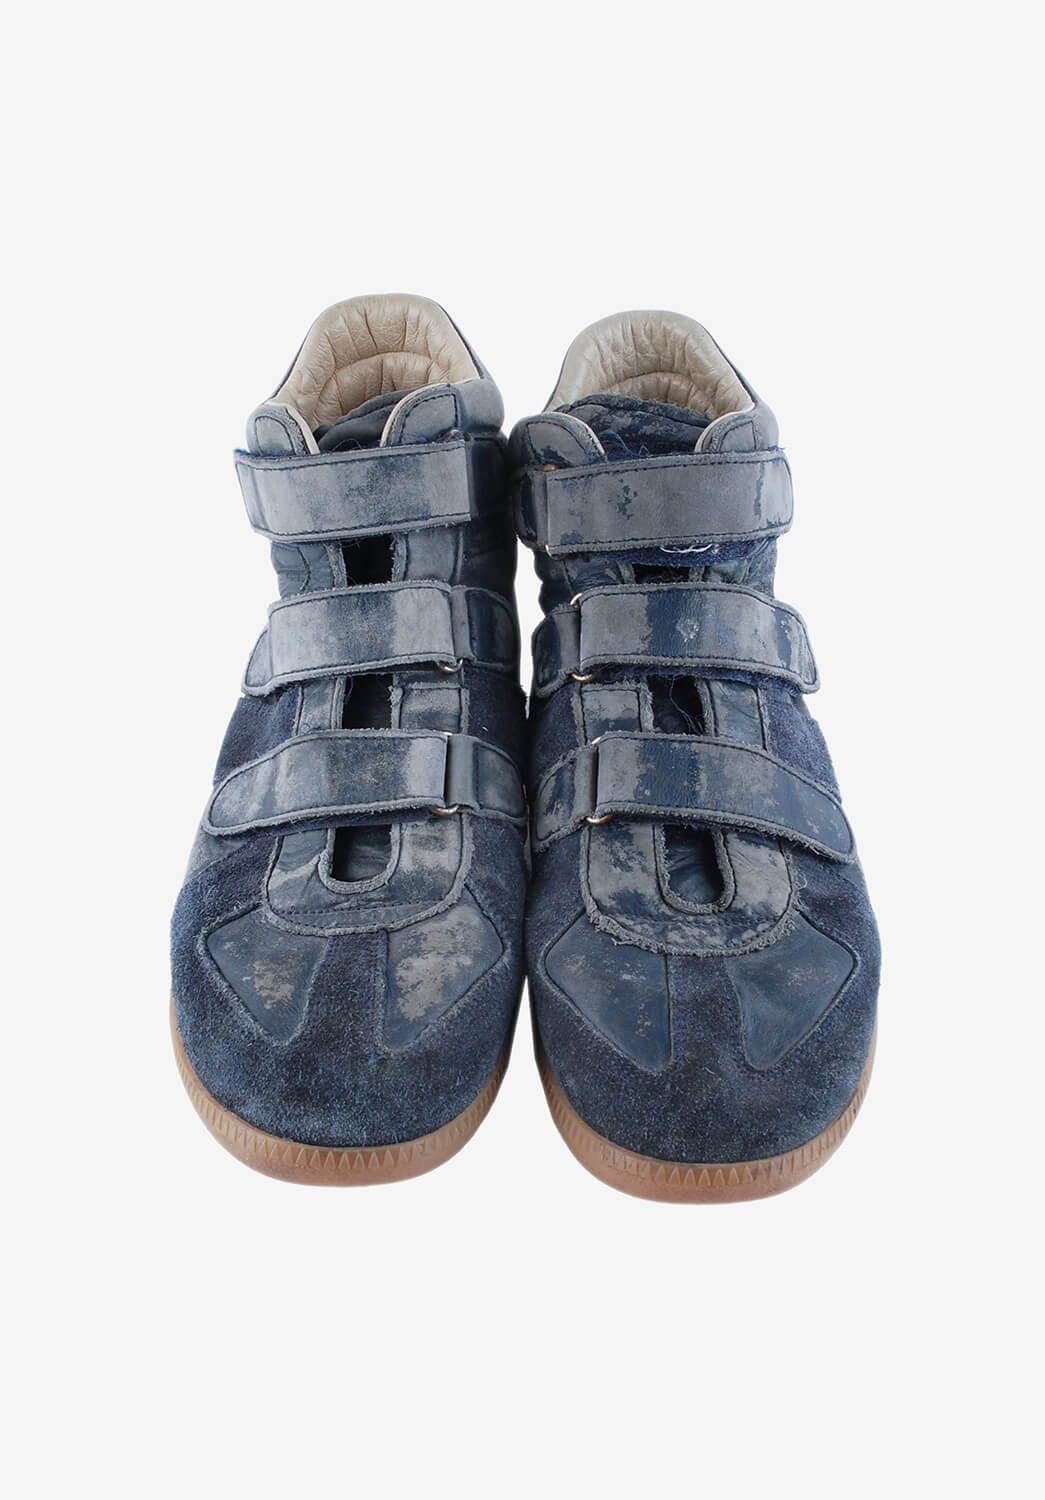 Pre-owned Maison Margiela Martin Margiela High Top Sneakers Leather Shoes 43eu In Blue